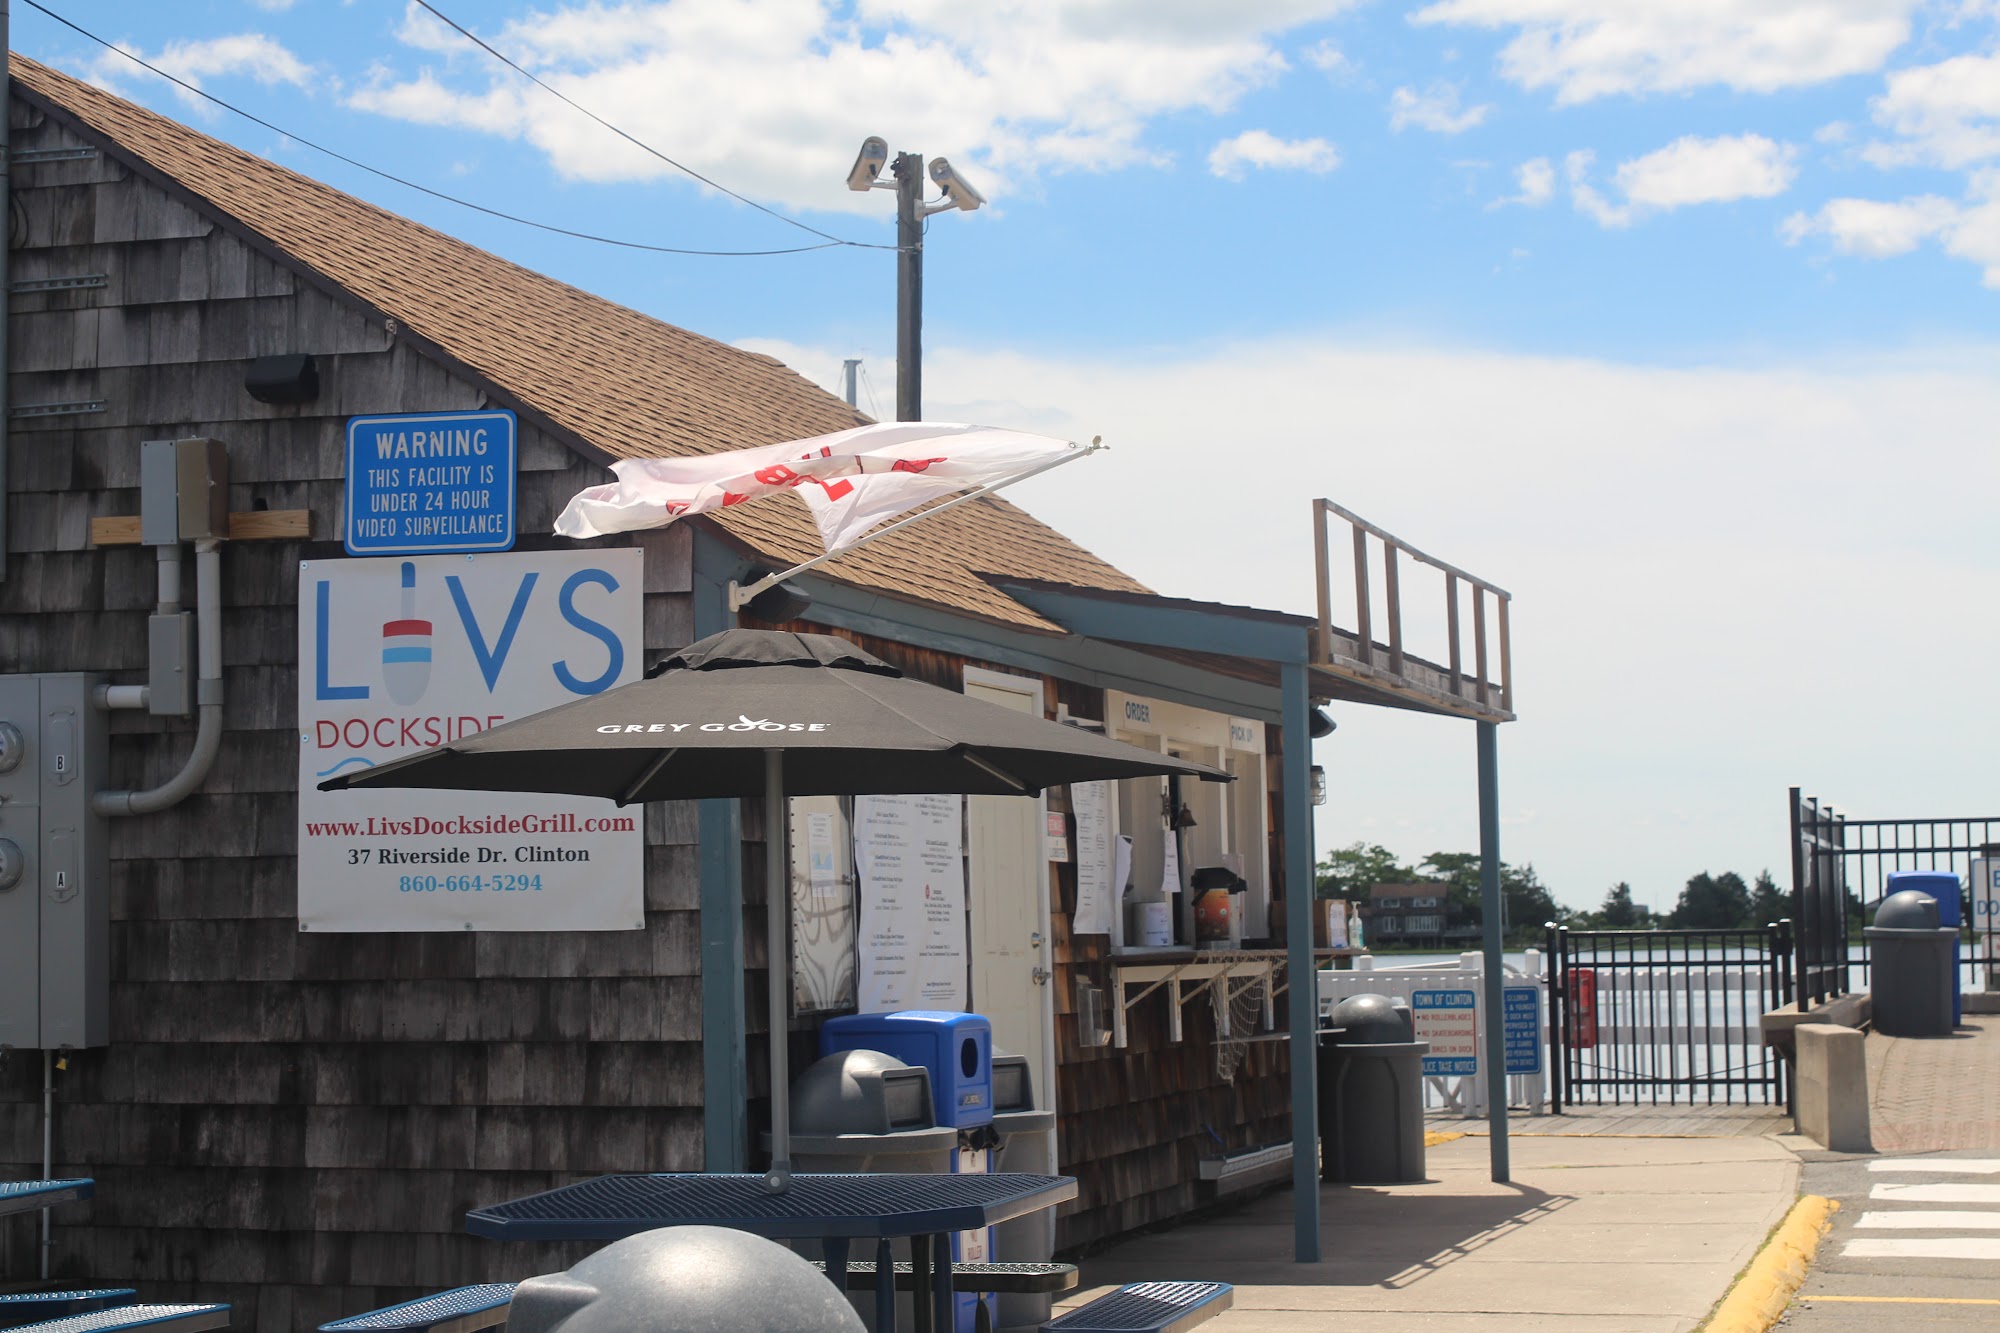 Liv's Dockside Grill - Lobster Rolls and more 68 Cedar Island Ave, Clinton, CT 06413